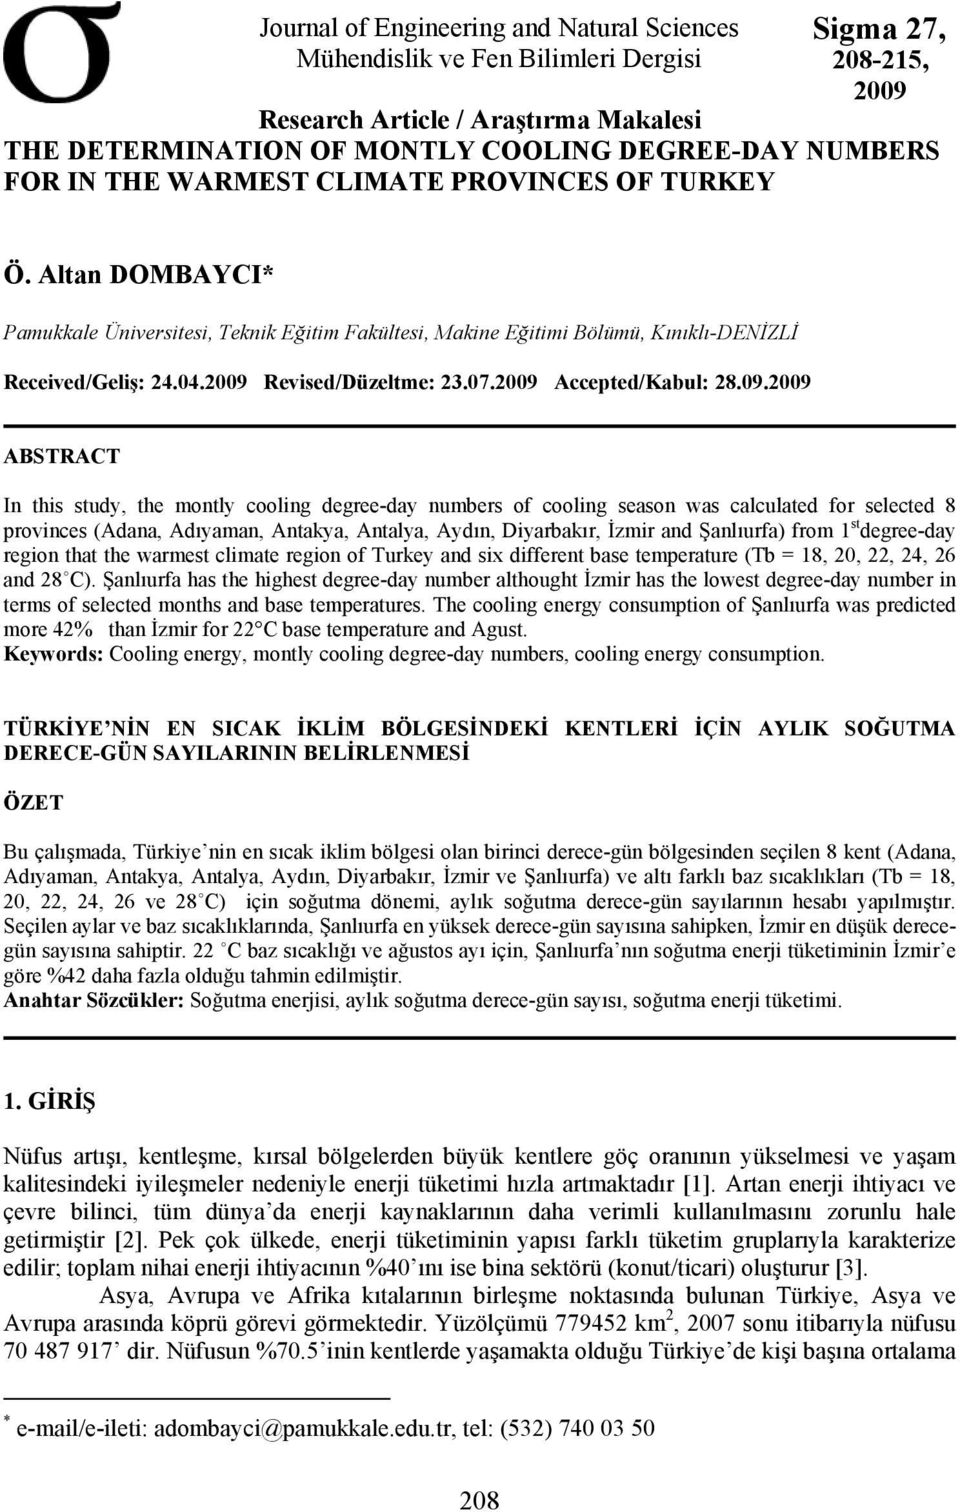 2009 Revised/Düzeltme: 23.07.2009 Accepted/Kaul: 28.09.2009 ABSTRACT In this study, the montly cooling degree-day numers of cooling season was calculated for selected 8 provinces (Adana, Adıyaman,